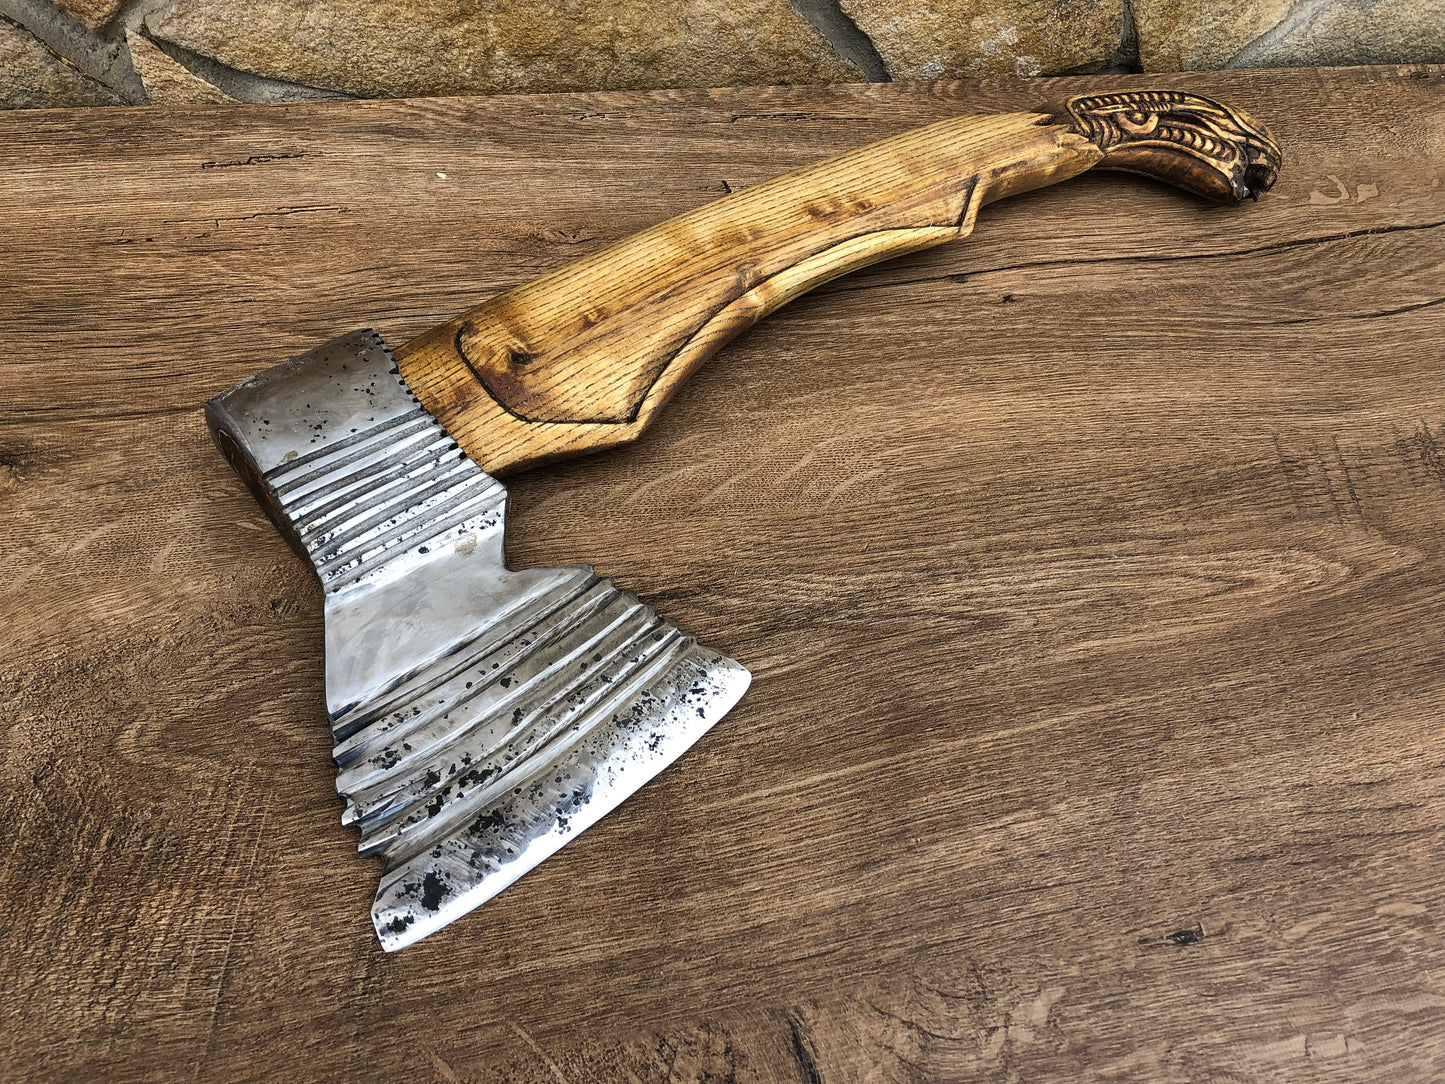 Manly gift, birthday gift, viking axe, anniversary gift, alien, Leviathan axe, handyman gift, Kratos, mens gifts, mens underwear, axes, tool